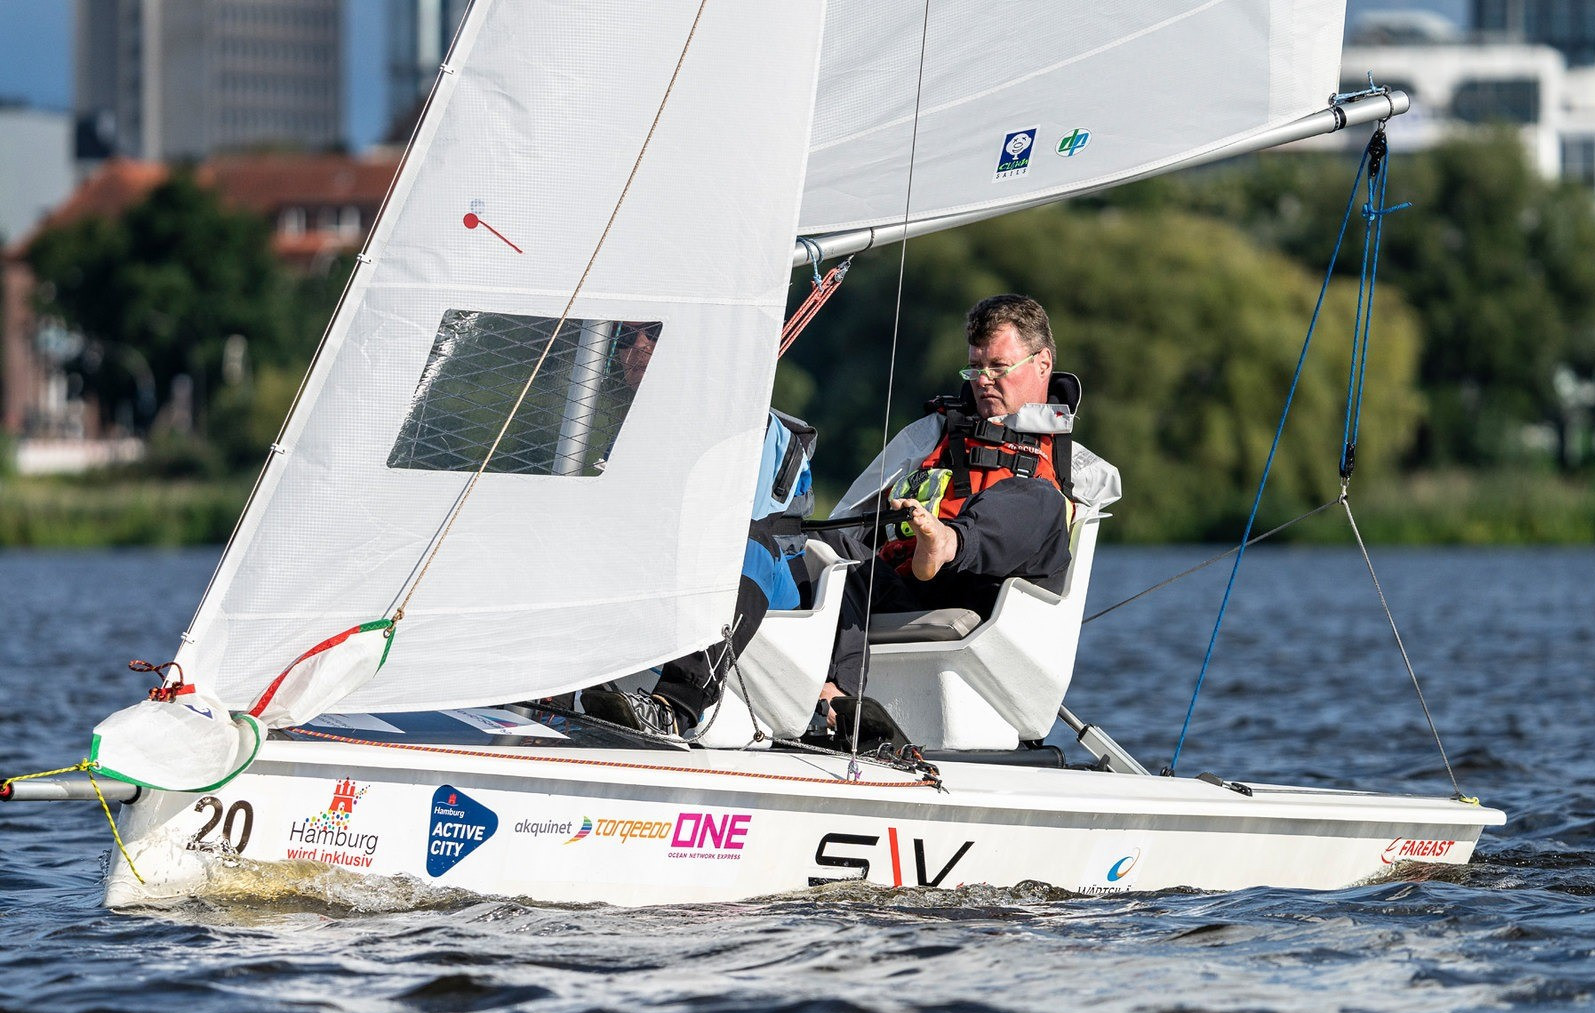 Attention set on sailing's Paralympic status prior to Inclusion World Championship in Rostock